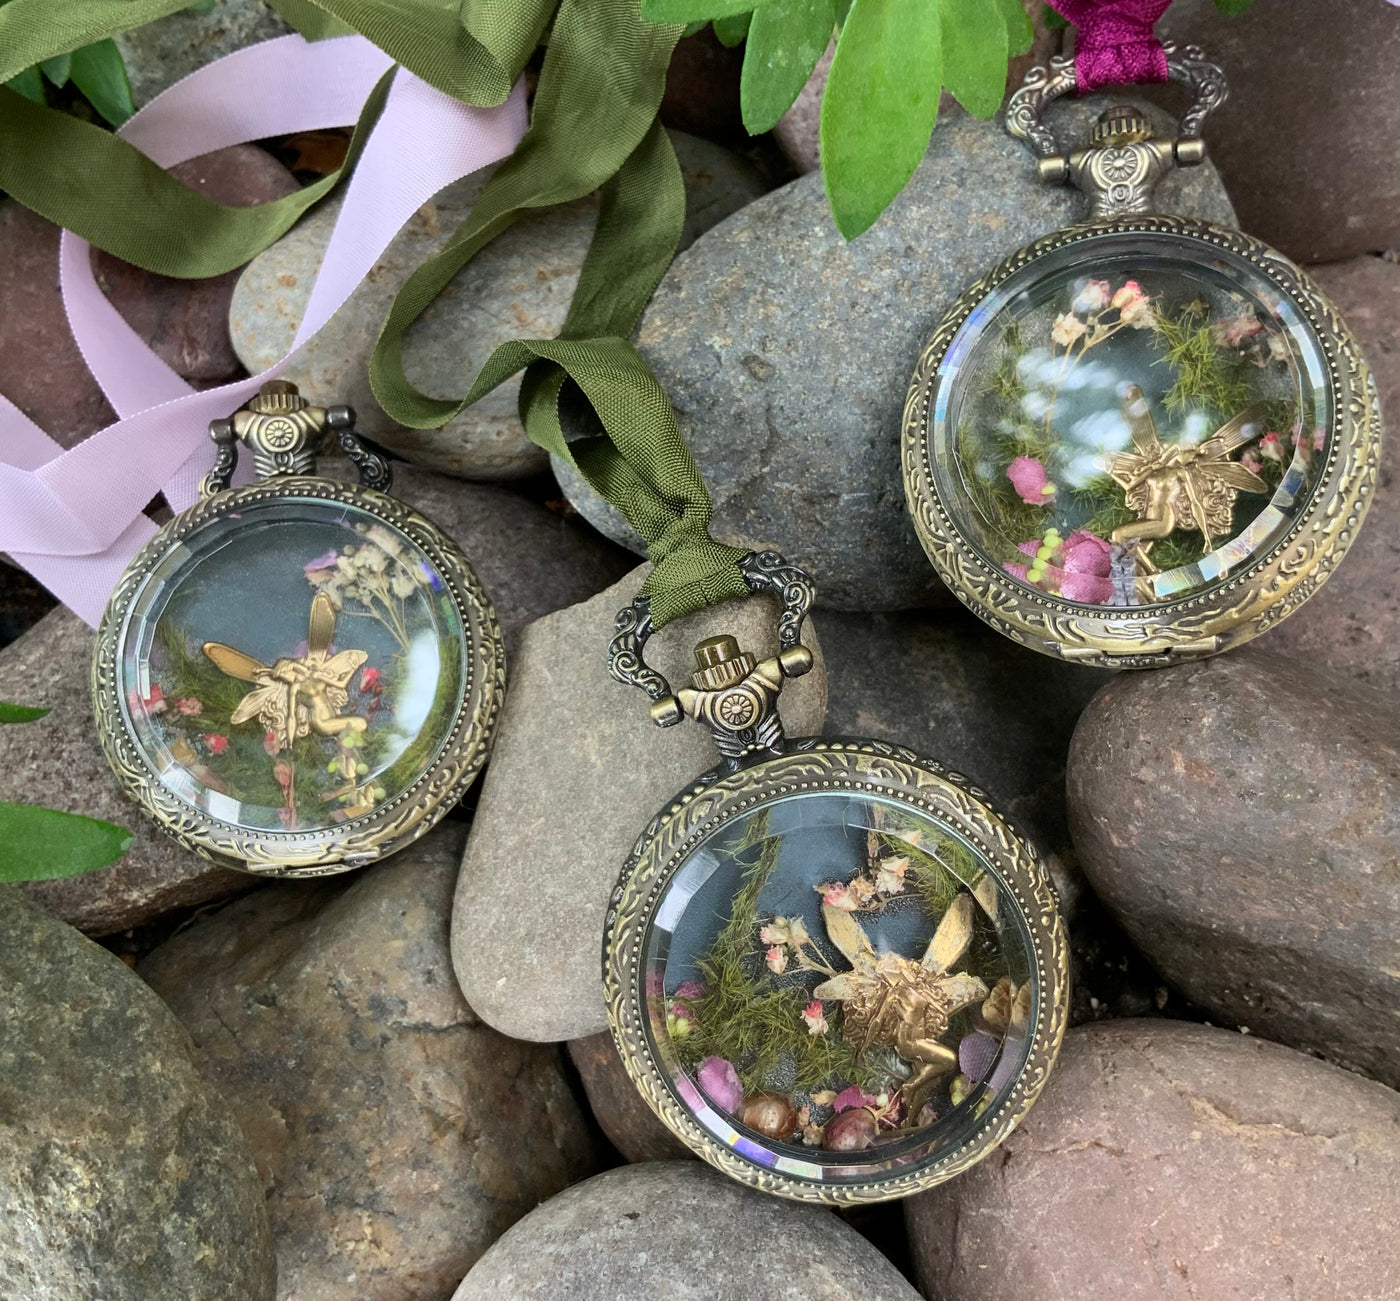 QUEEN OF THE FAIRIES necklace